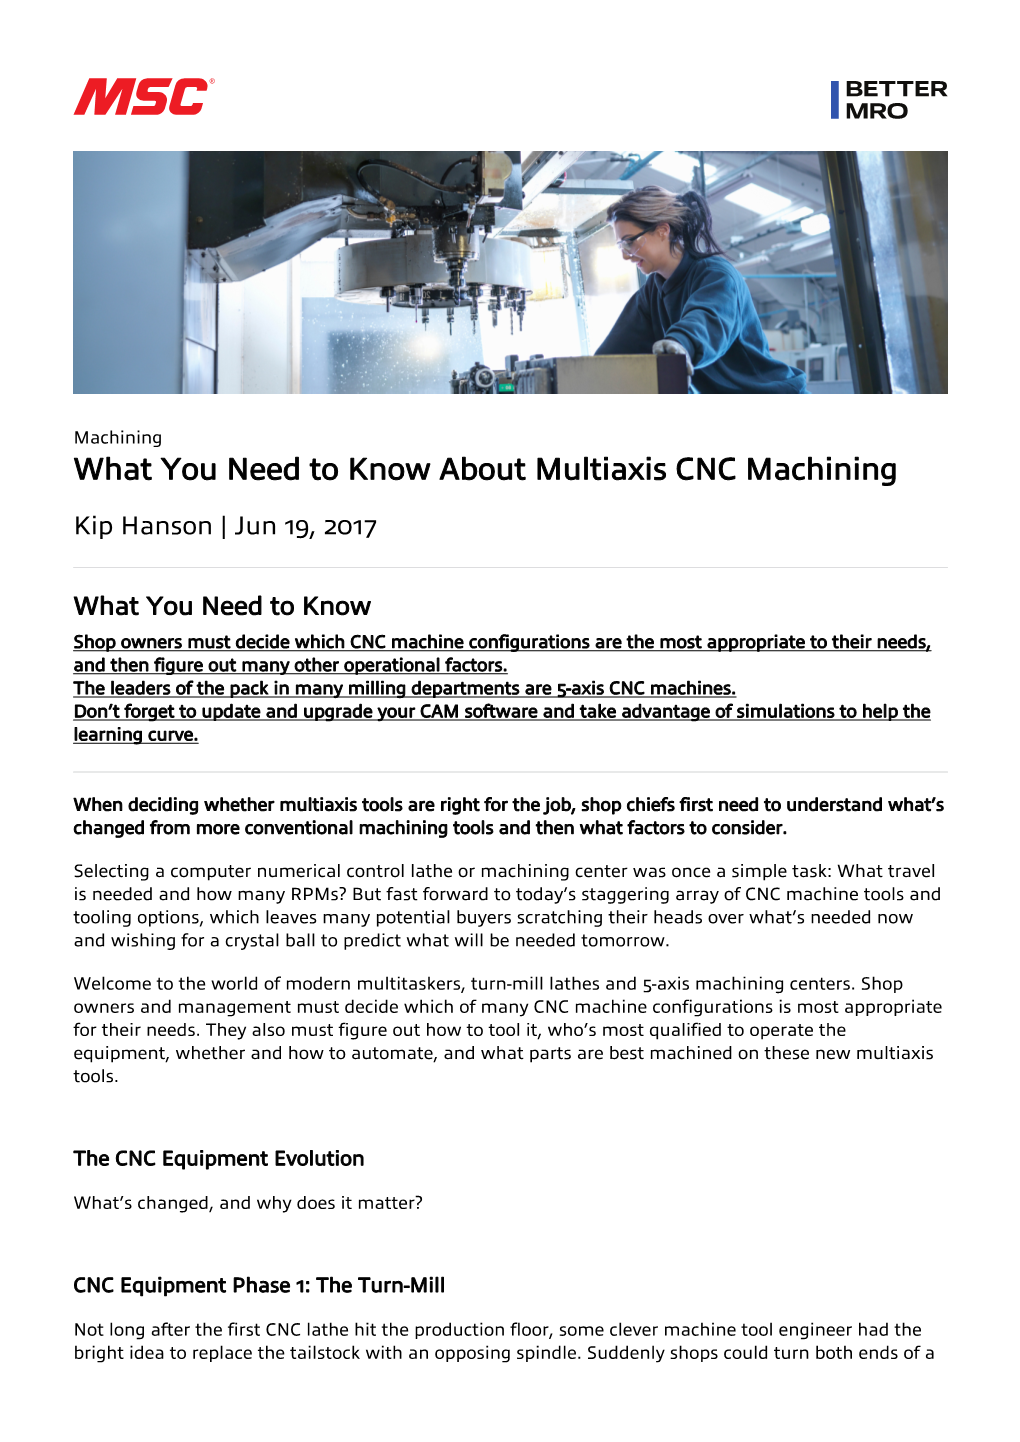 What You Need to Know About Multiaxis CNC Machining